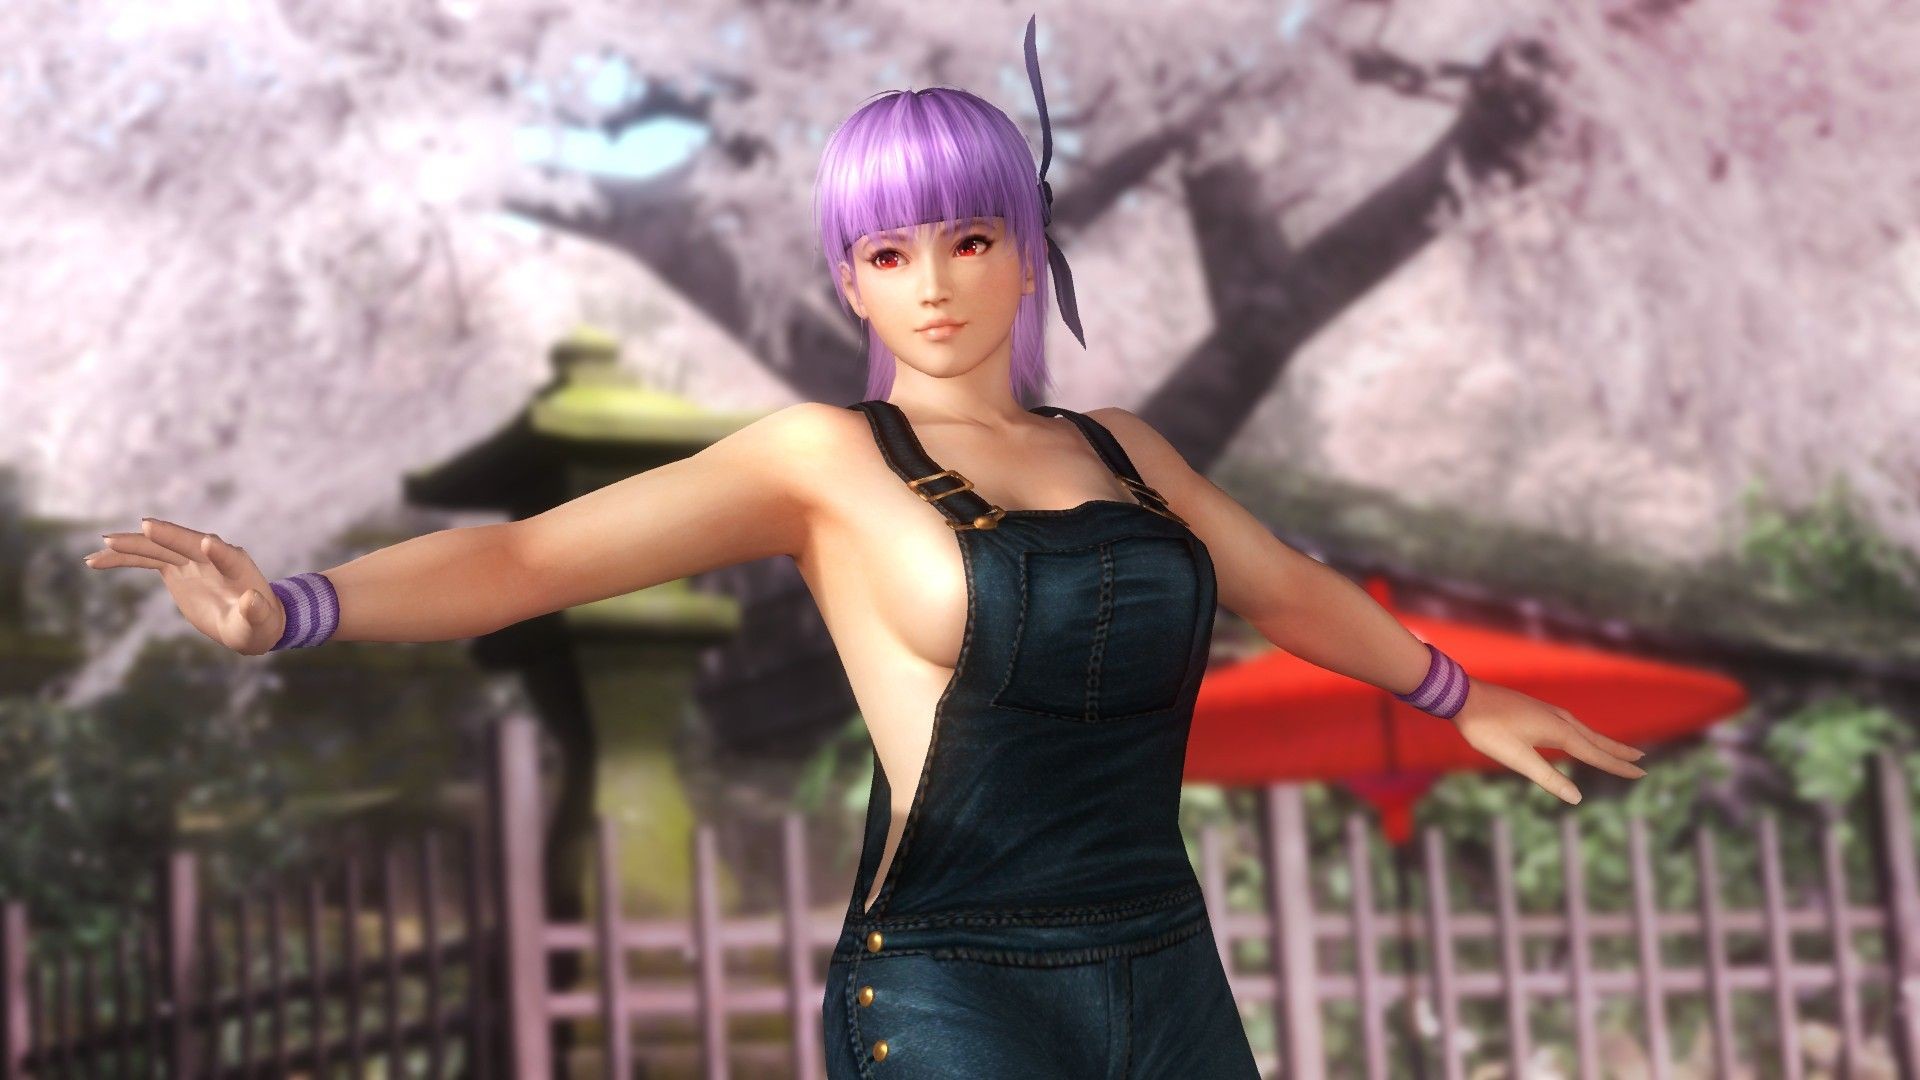 1920x1080 ayane dead or alive 5 - Google Search Dead Or Alive 5, Doa, Twitter